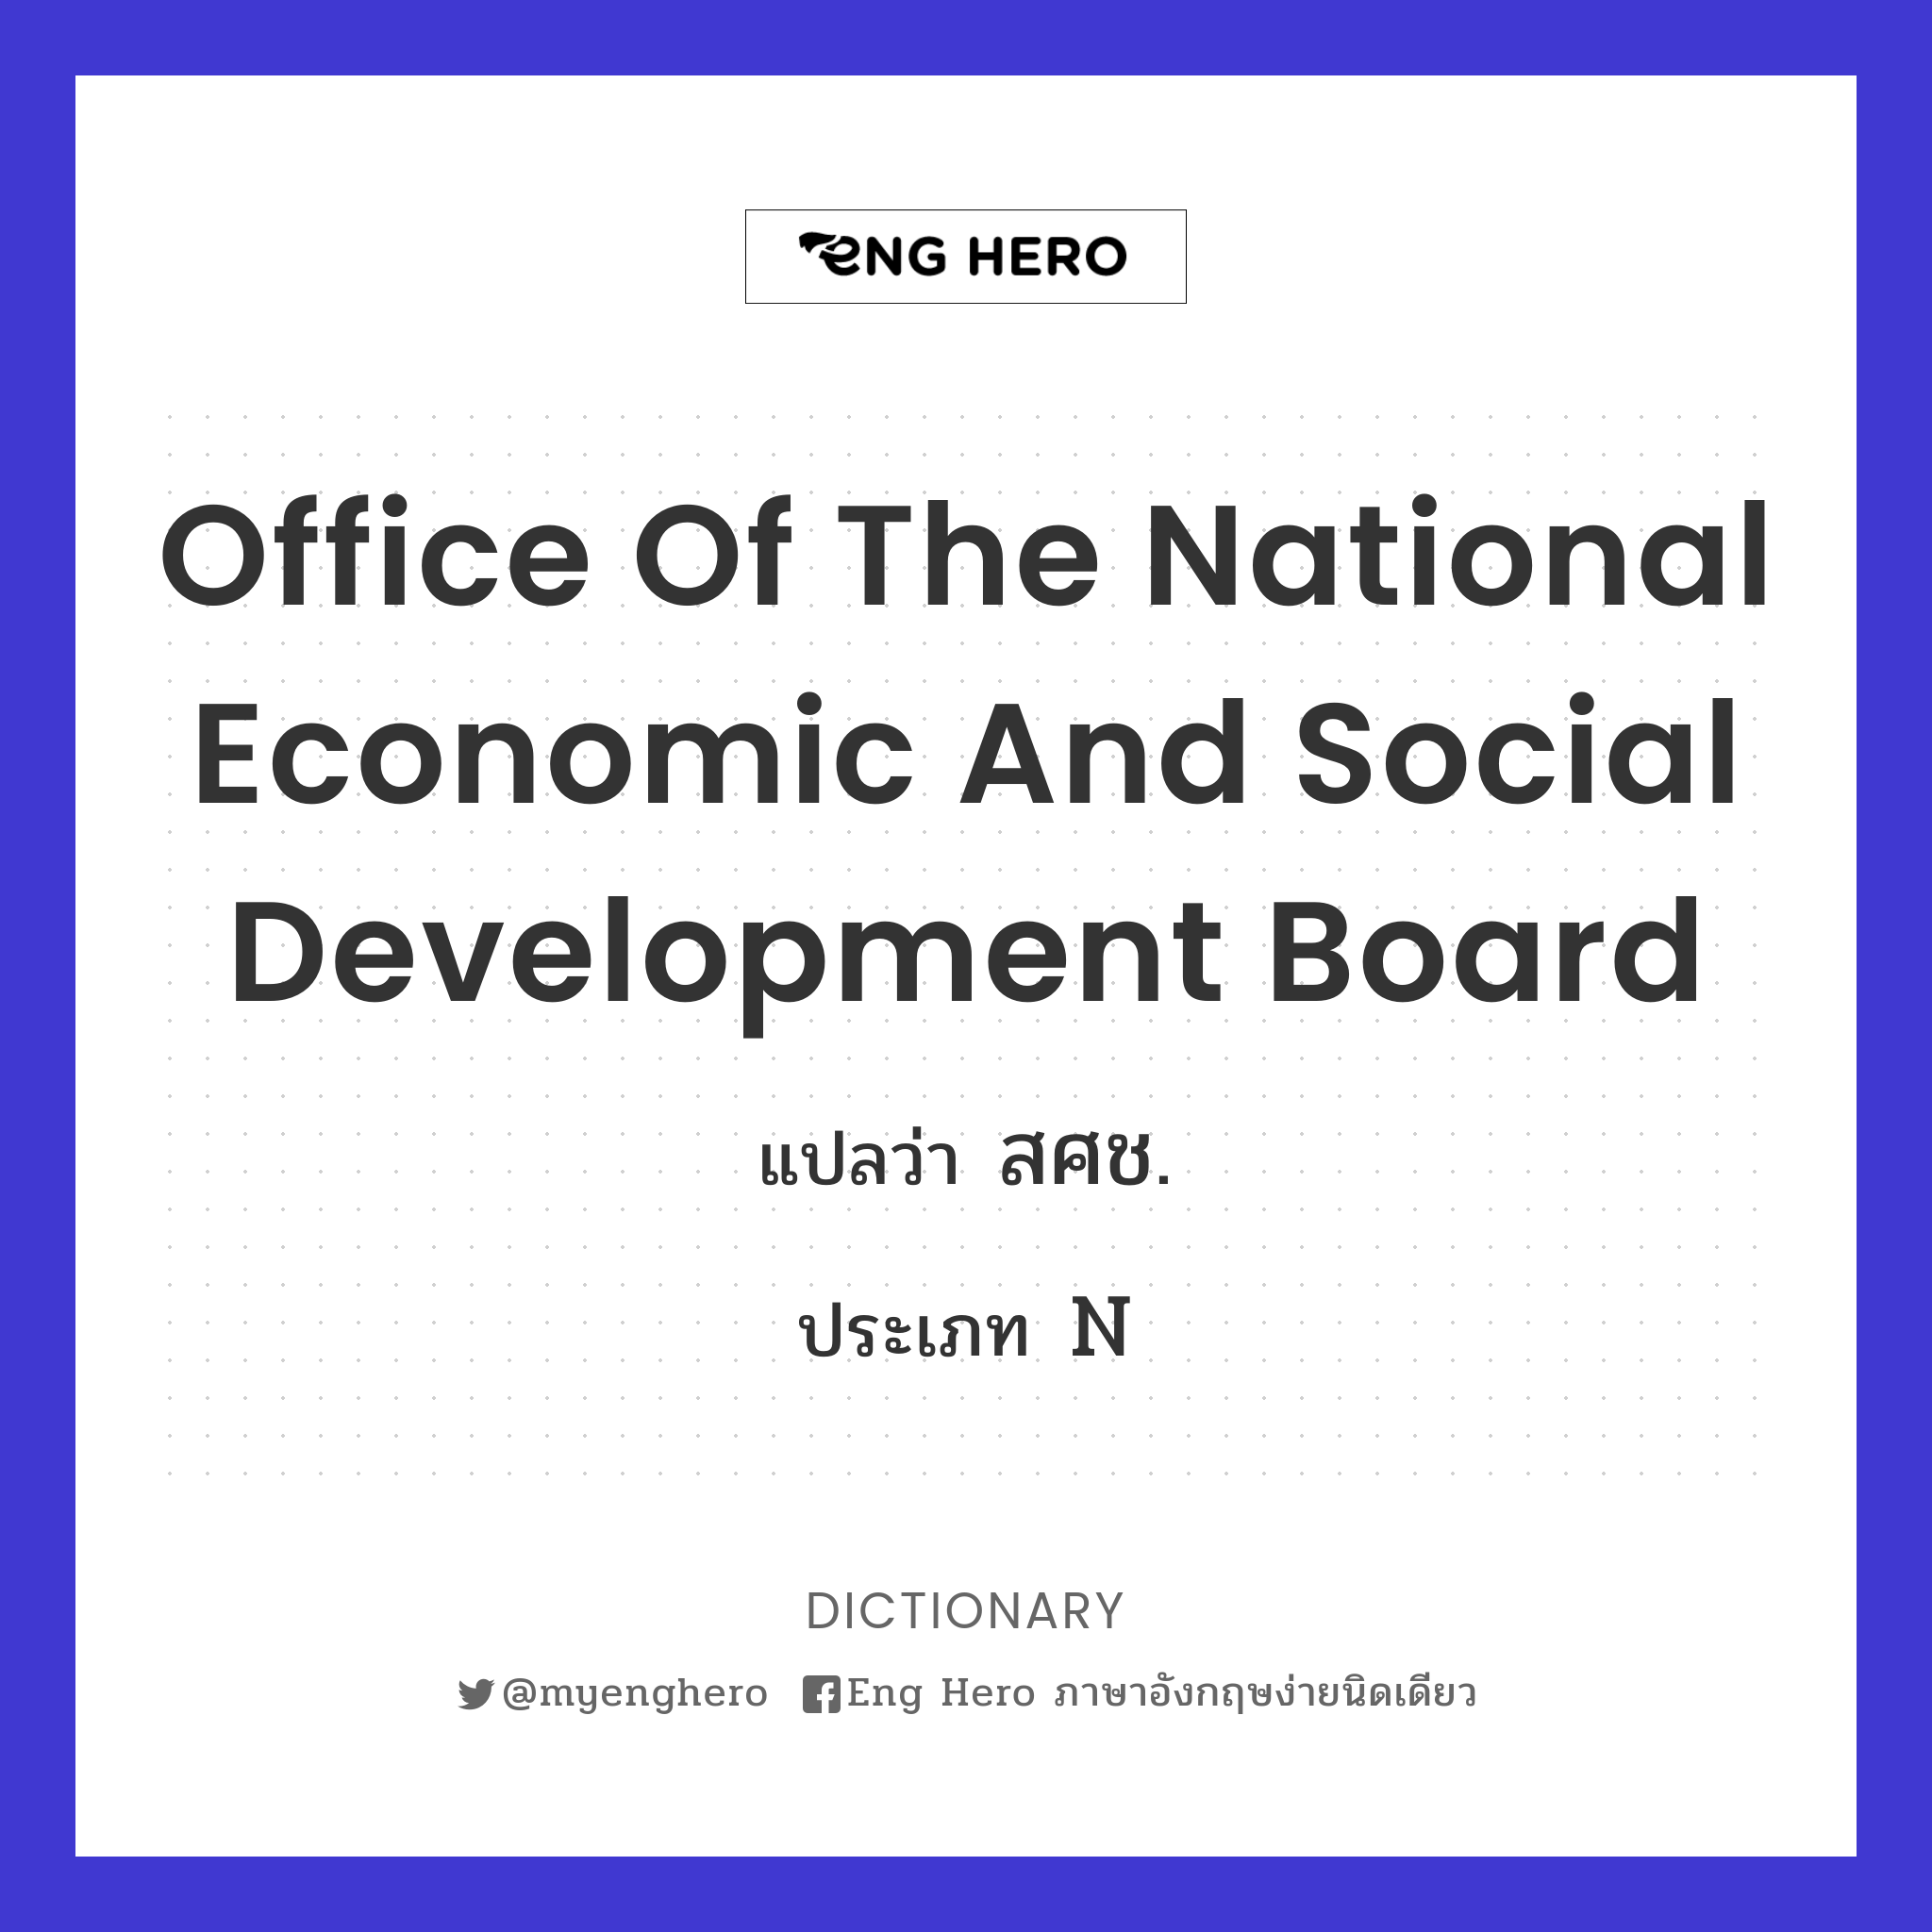 Office of the National Economic and Social Development Board